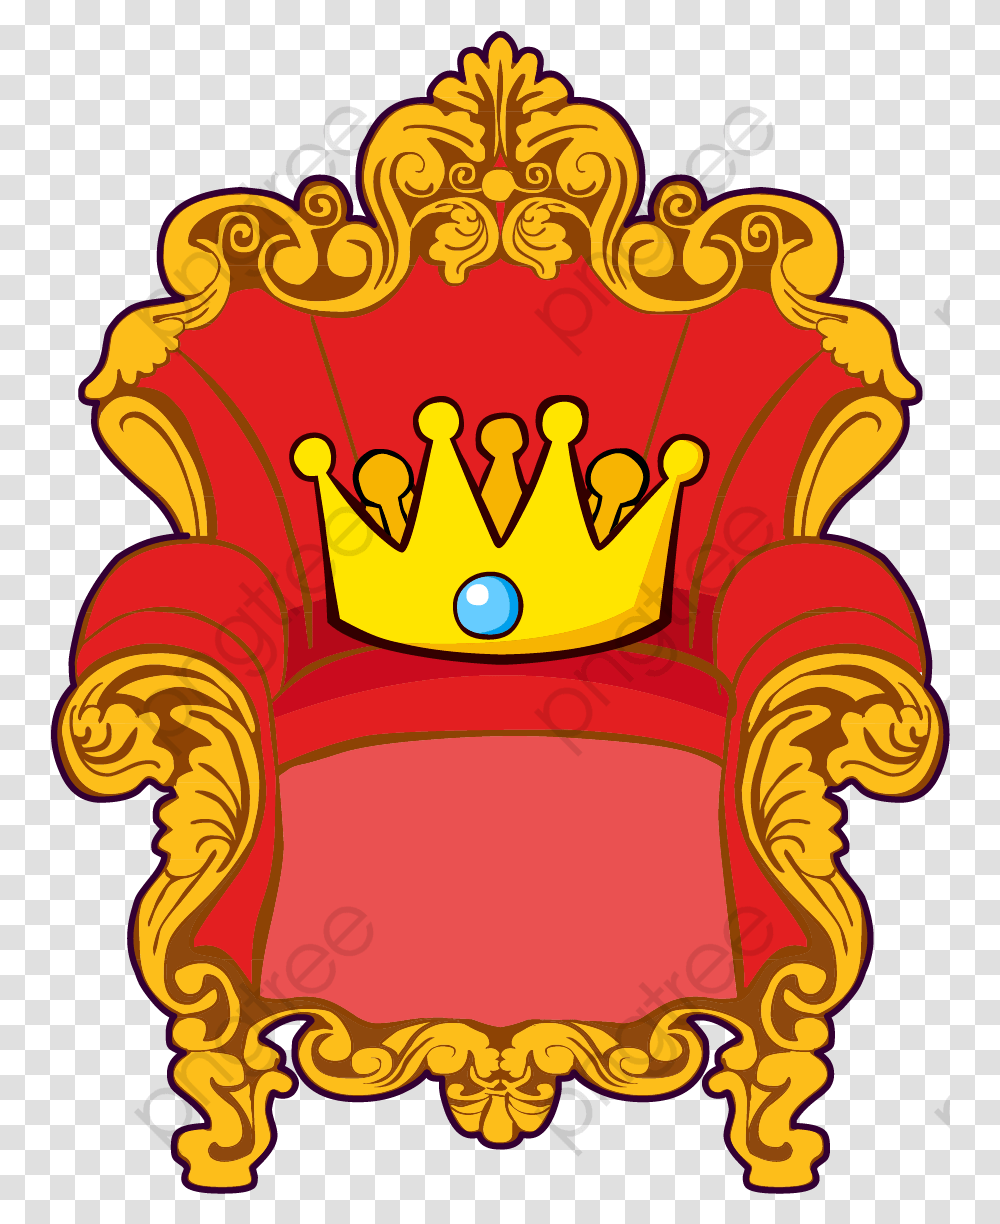 Cartoon Throne Golden Red Crown Throne Cartoon, Furniture, Jewelry, Accessories, Accessory Transparent Png